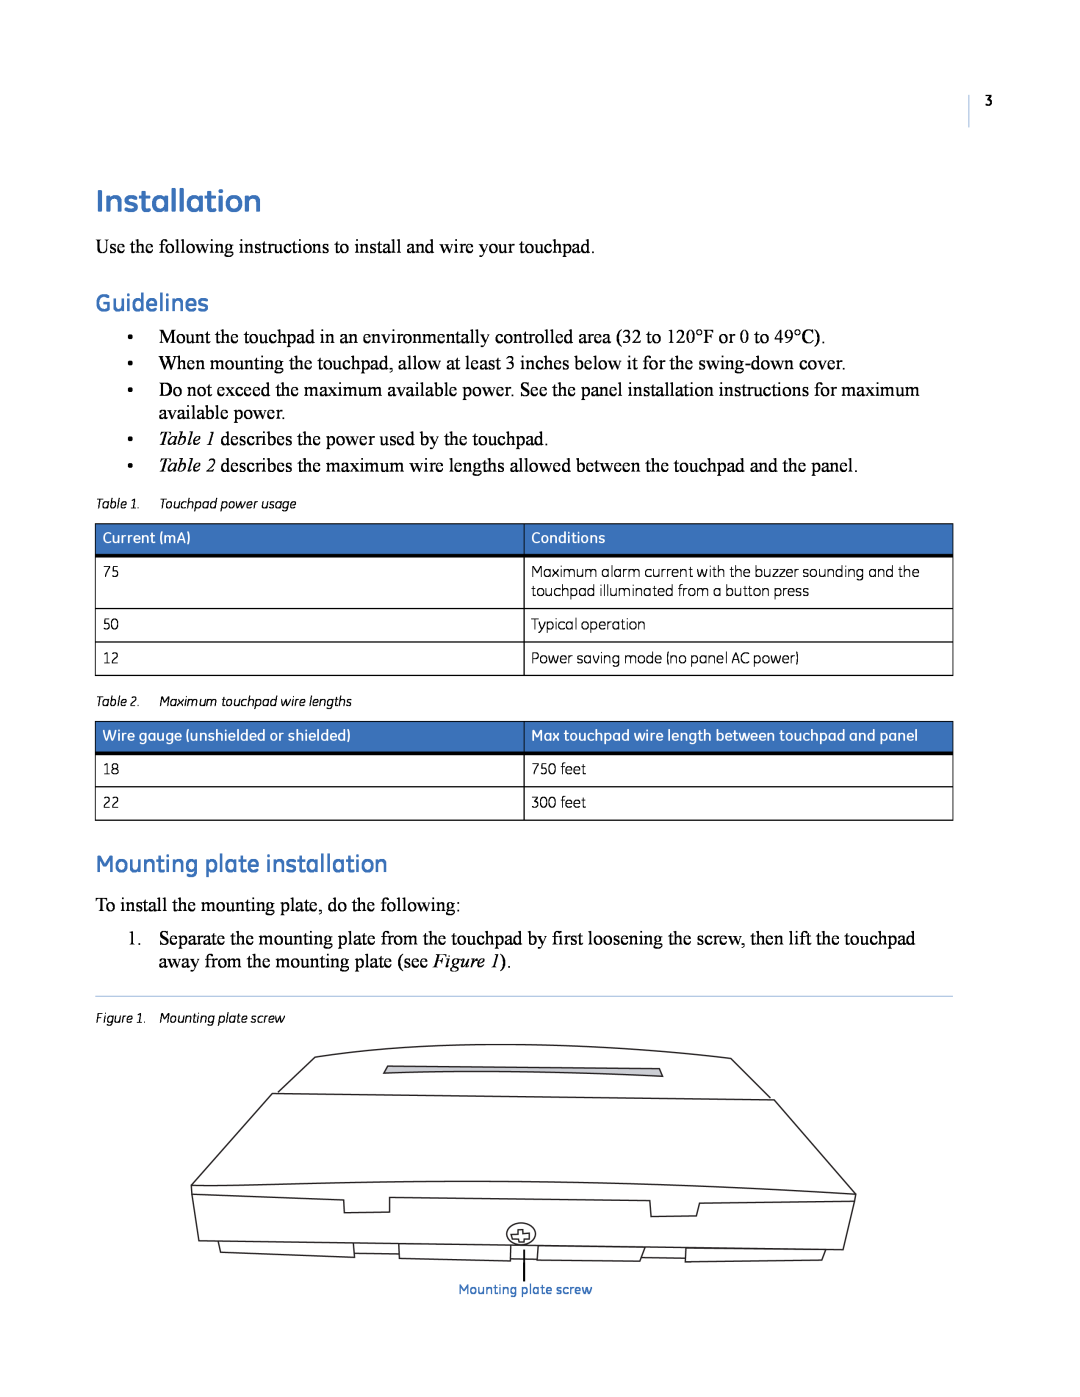 GE FTP-1000 installation manual Installation, Guidelines, Mounting plate installation 